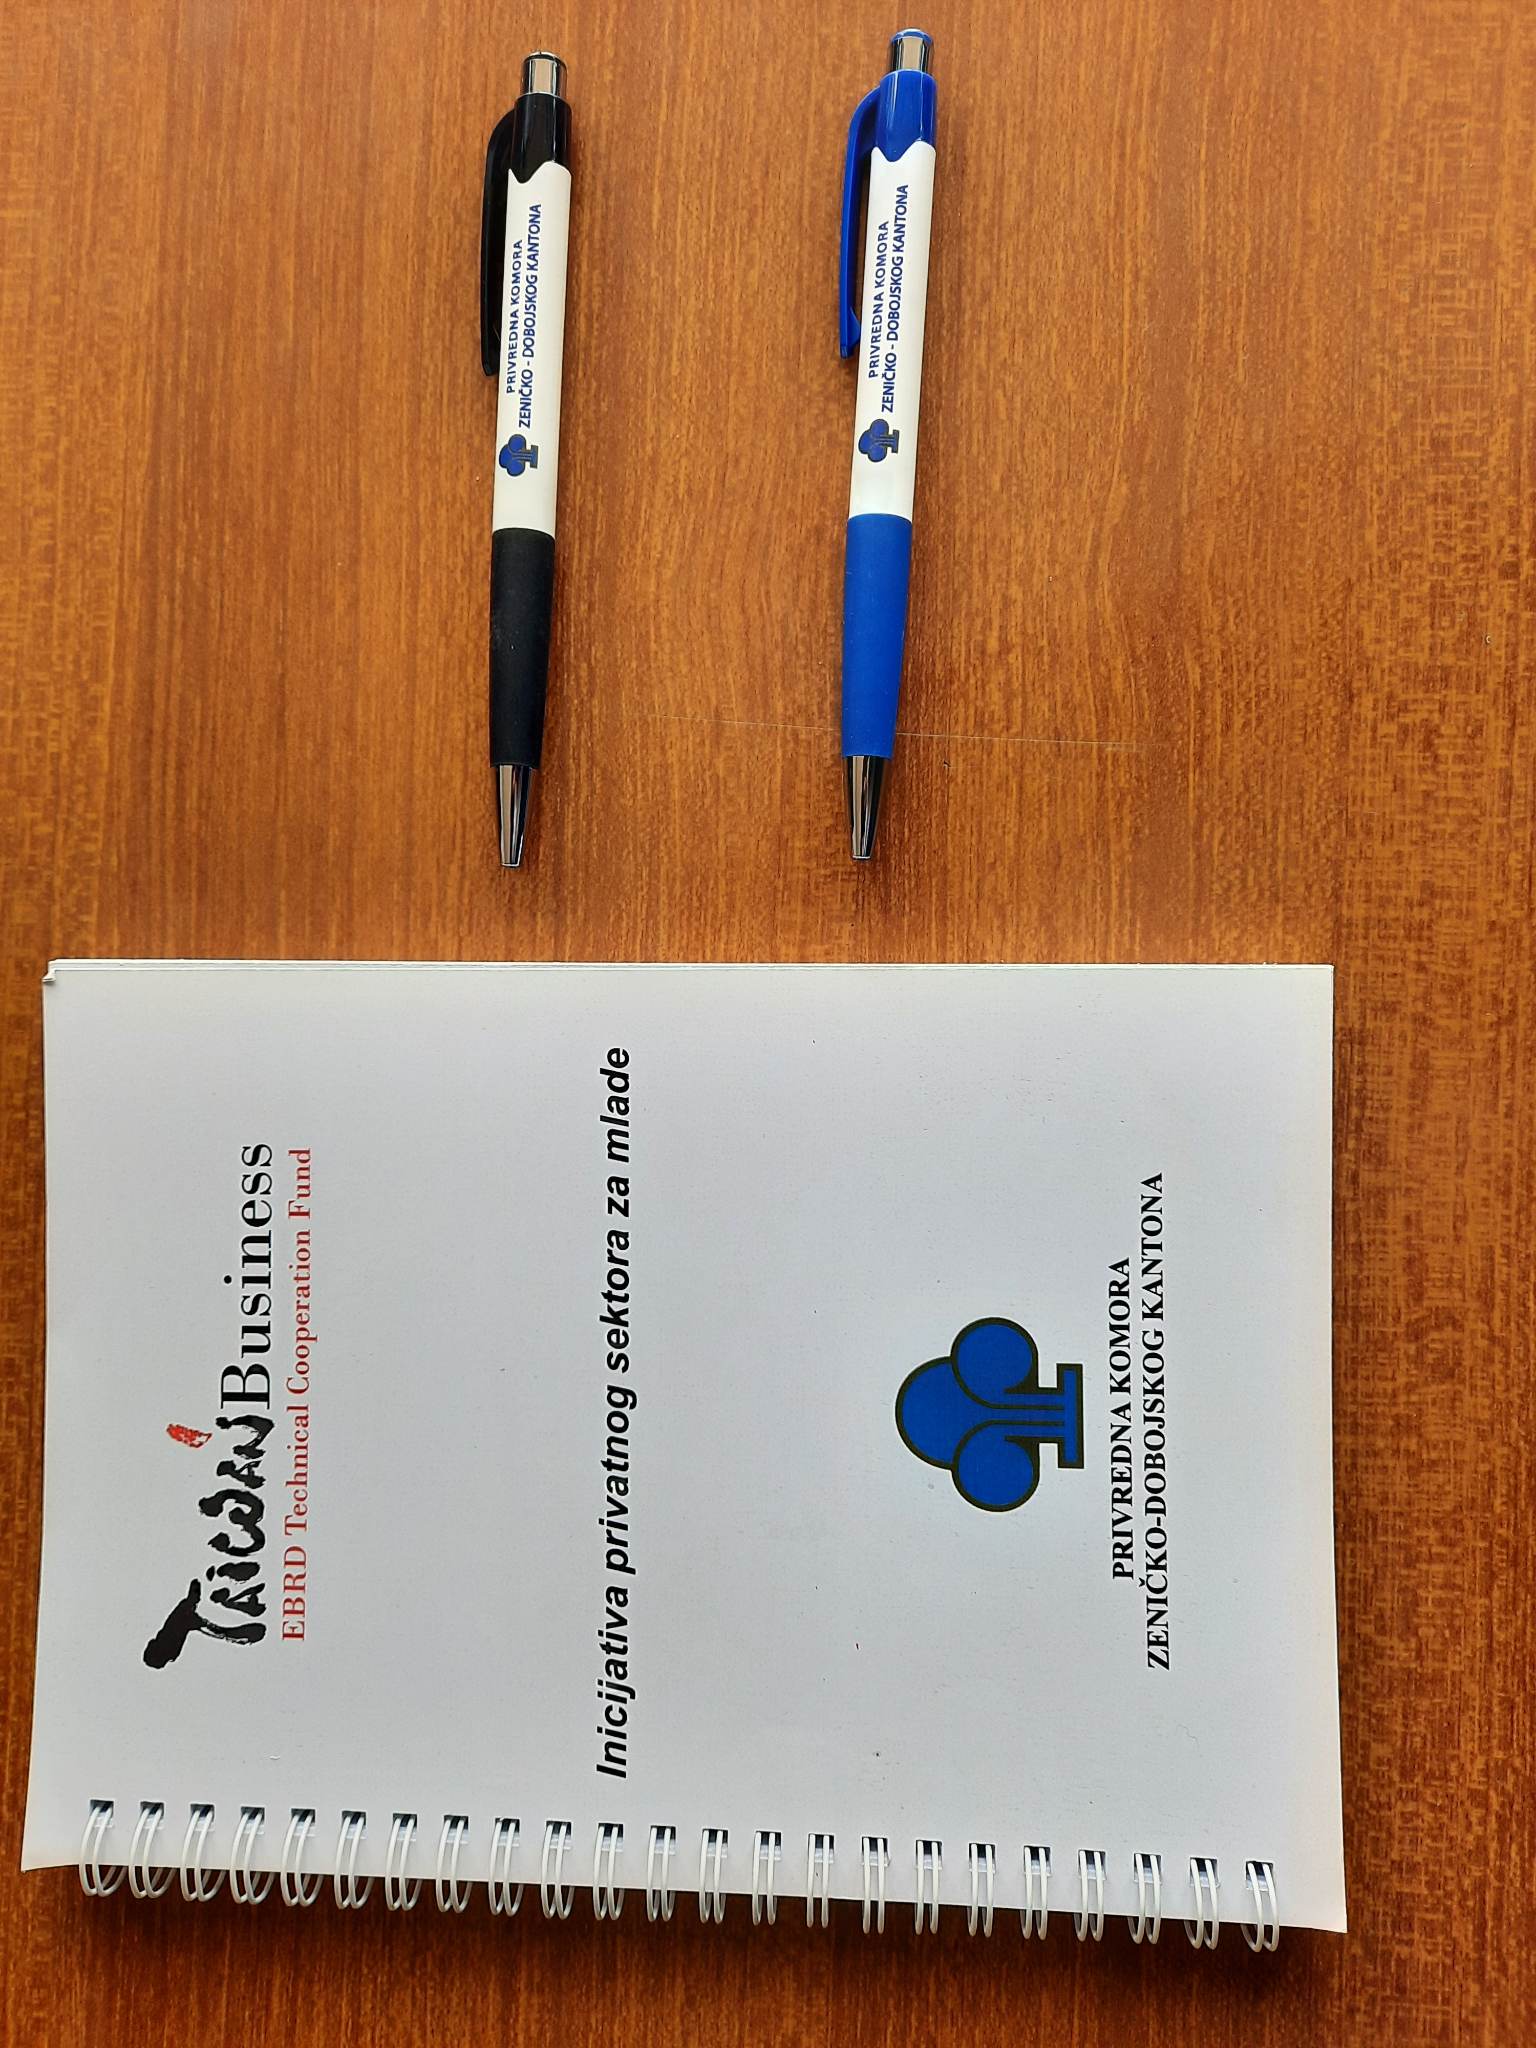 notepads and pens with the logo